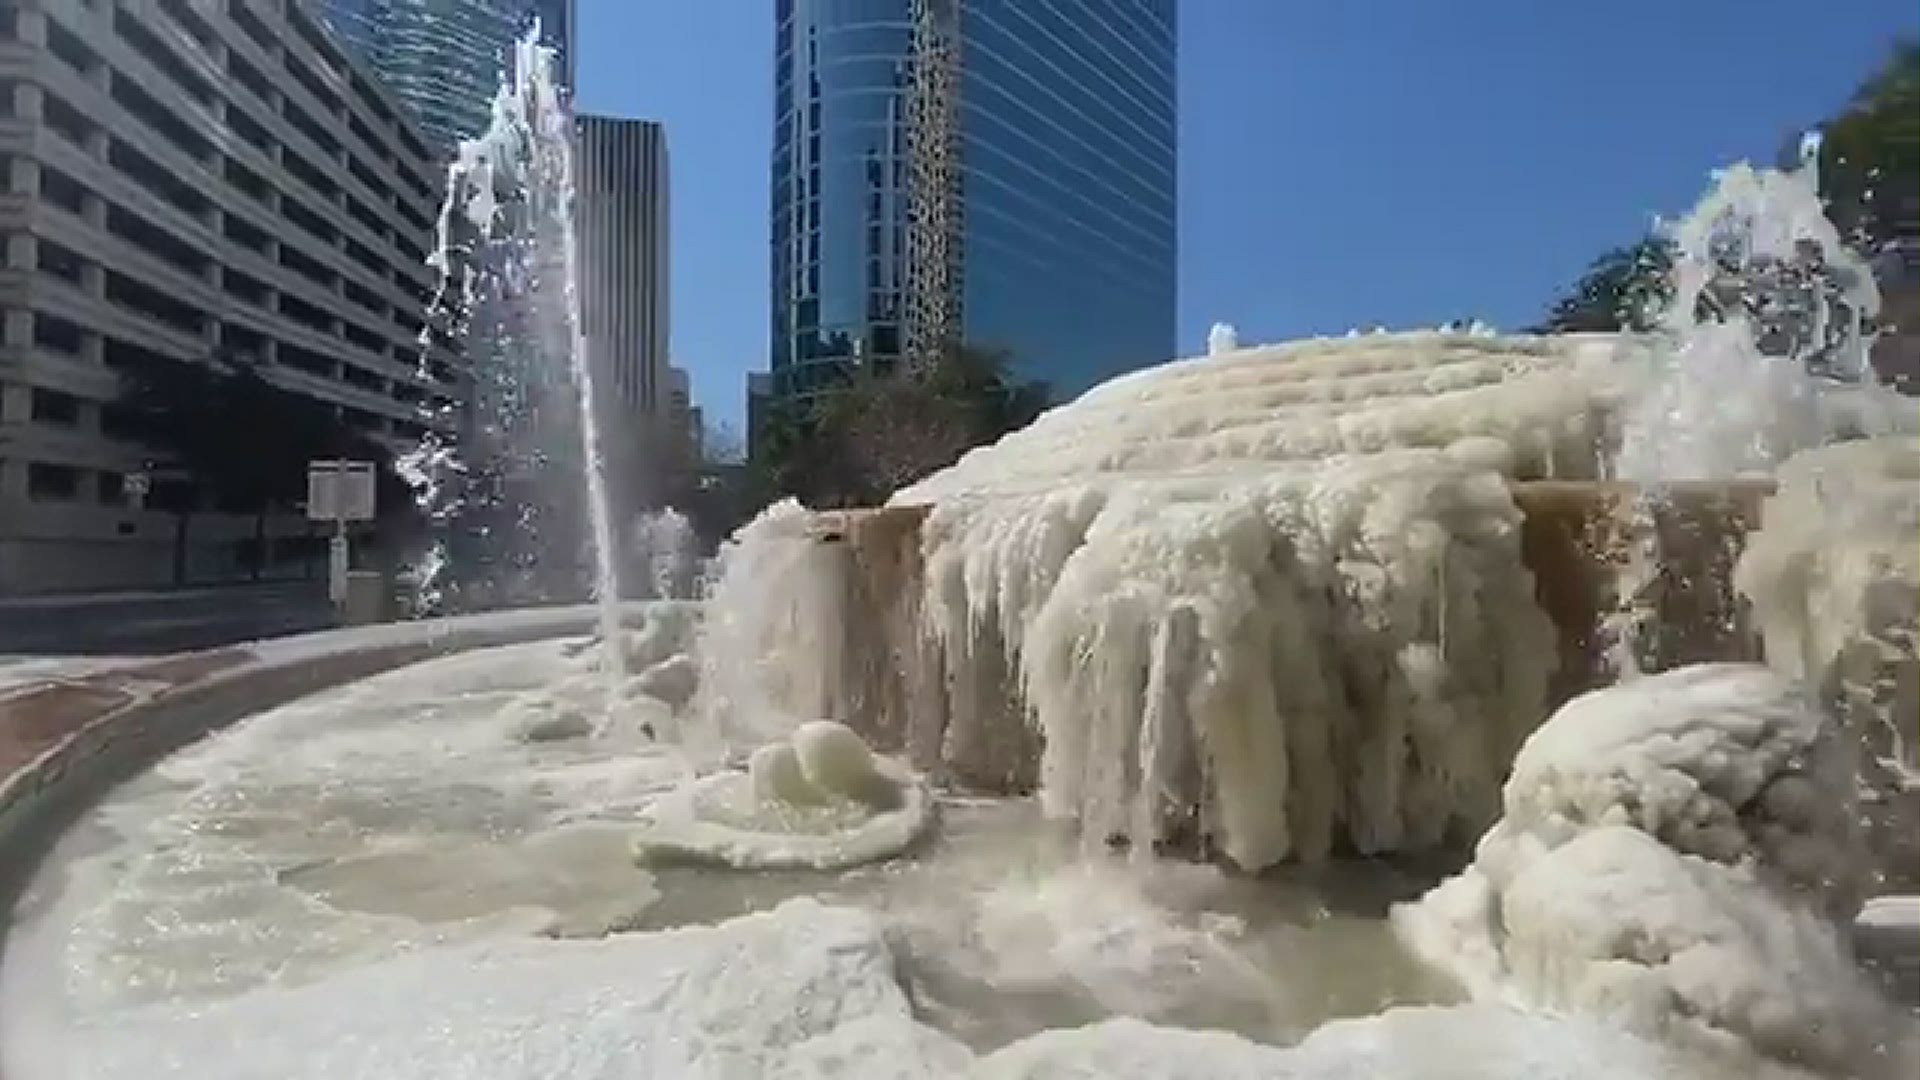 With these freezing temperatures, fountains are freezing over, like this one in downtown Houston.